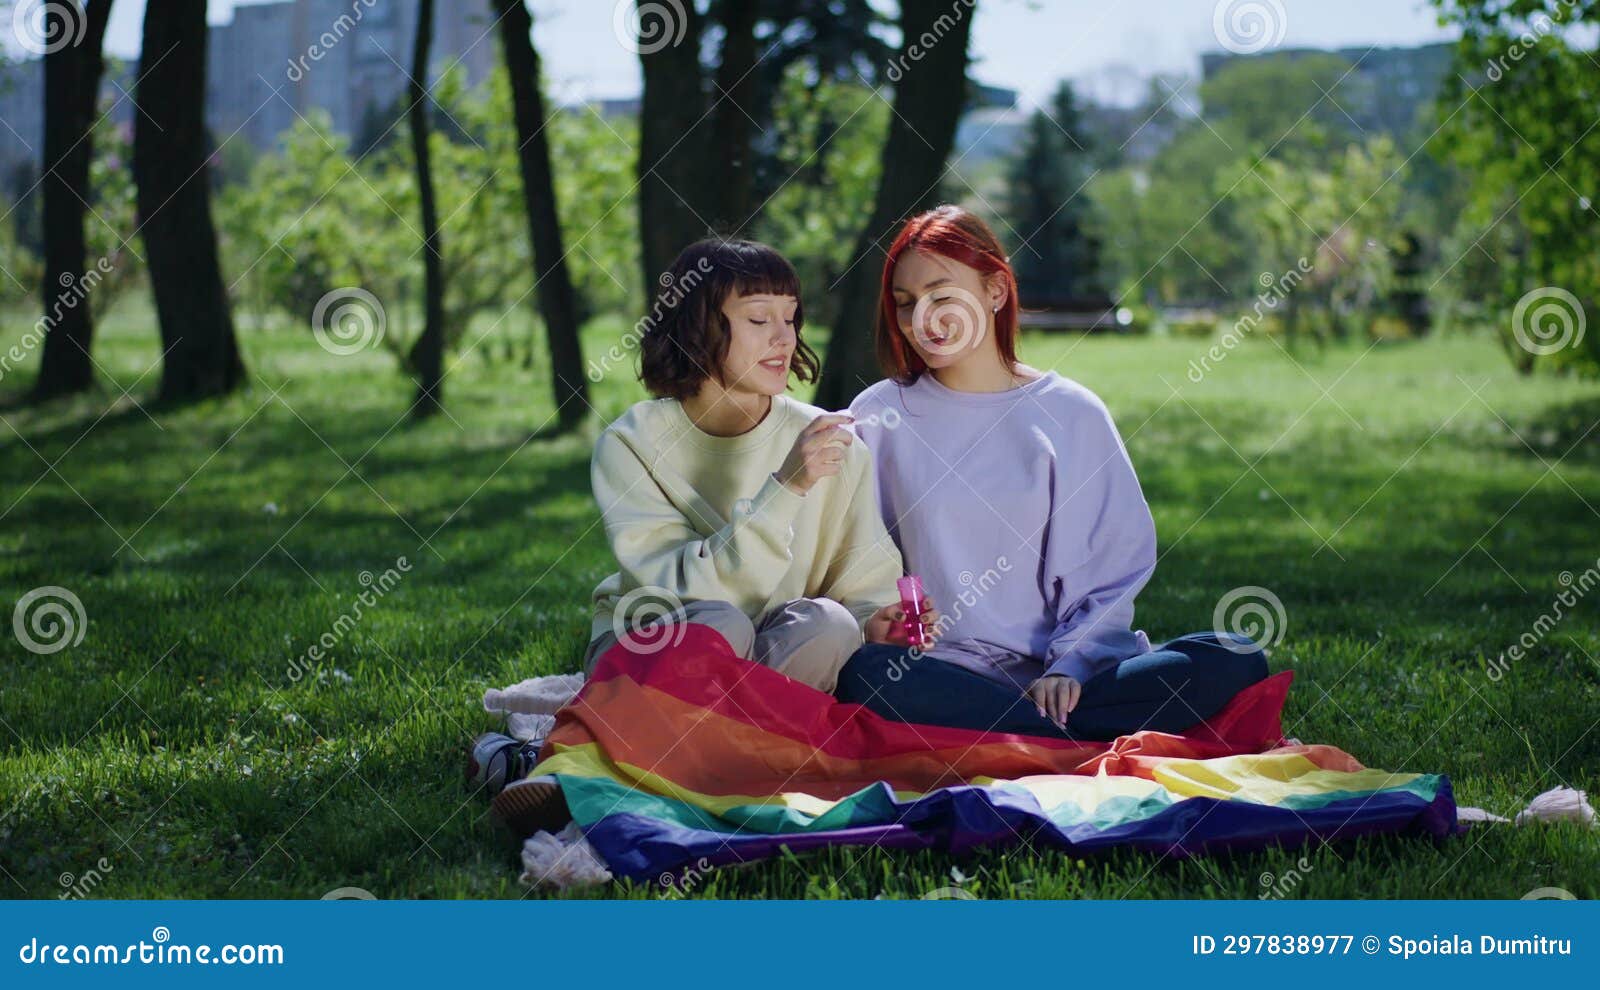 Concept Of Lgbt Community Lesbian Couple Kissing Each Other And Holding The Lgbt Rainbow Flag In